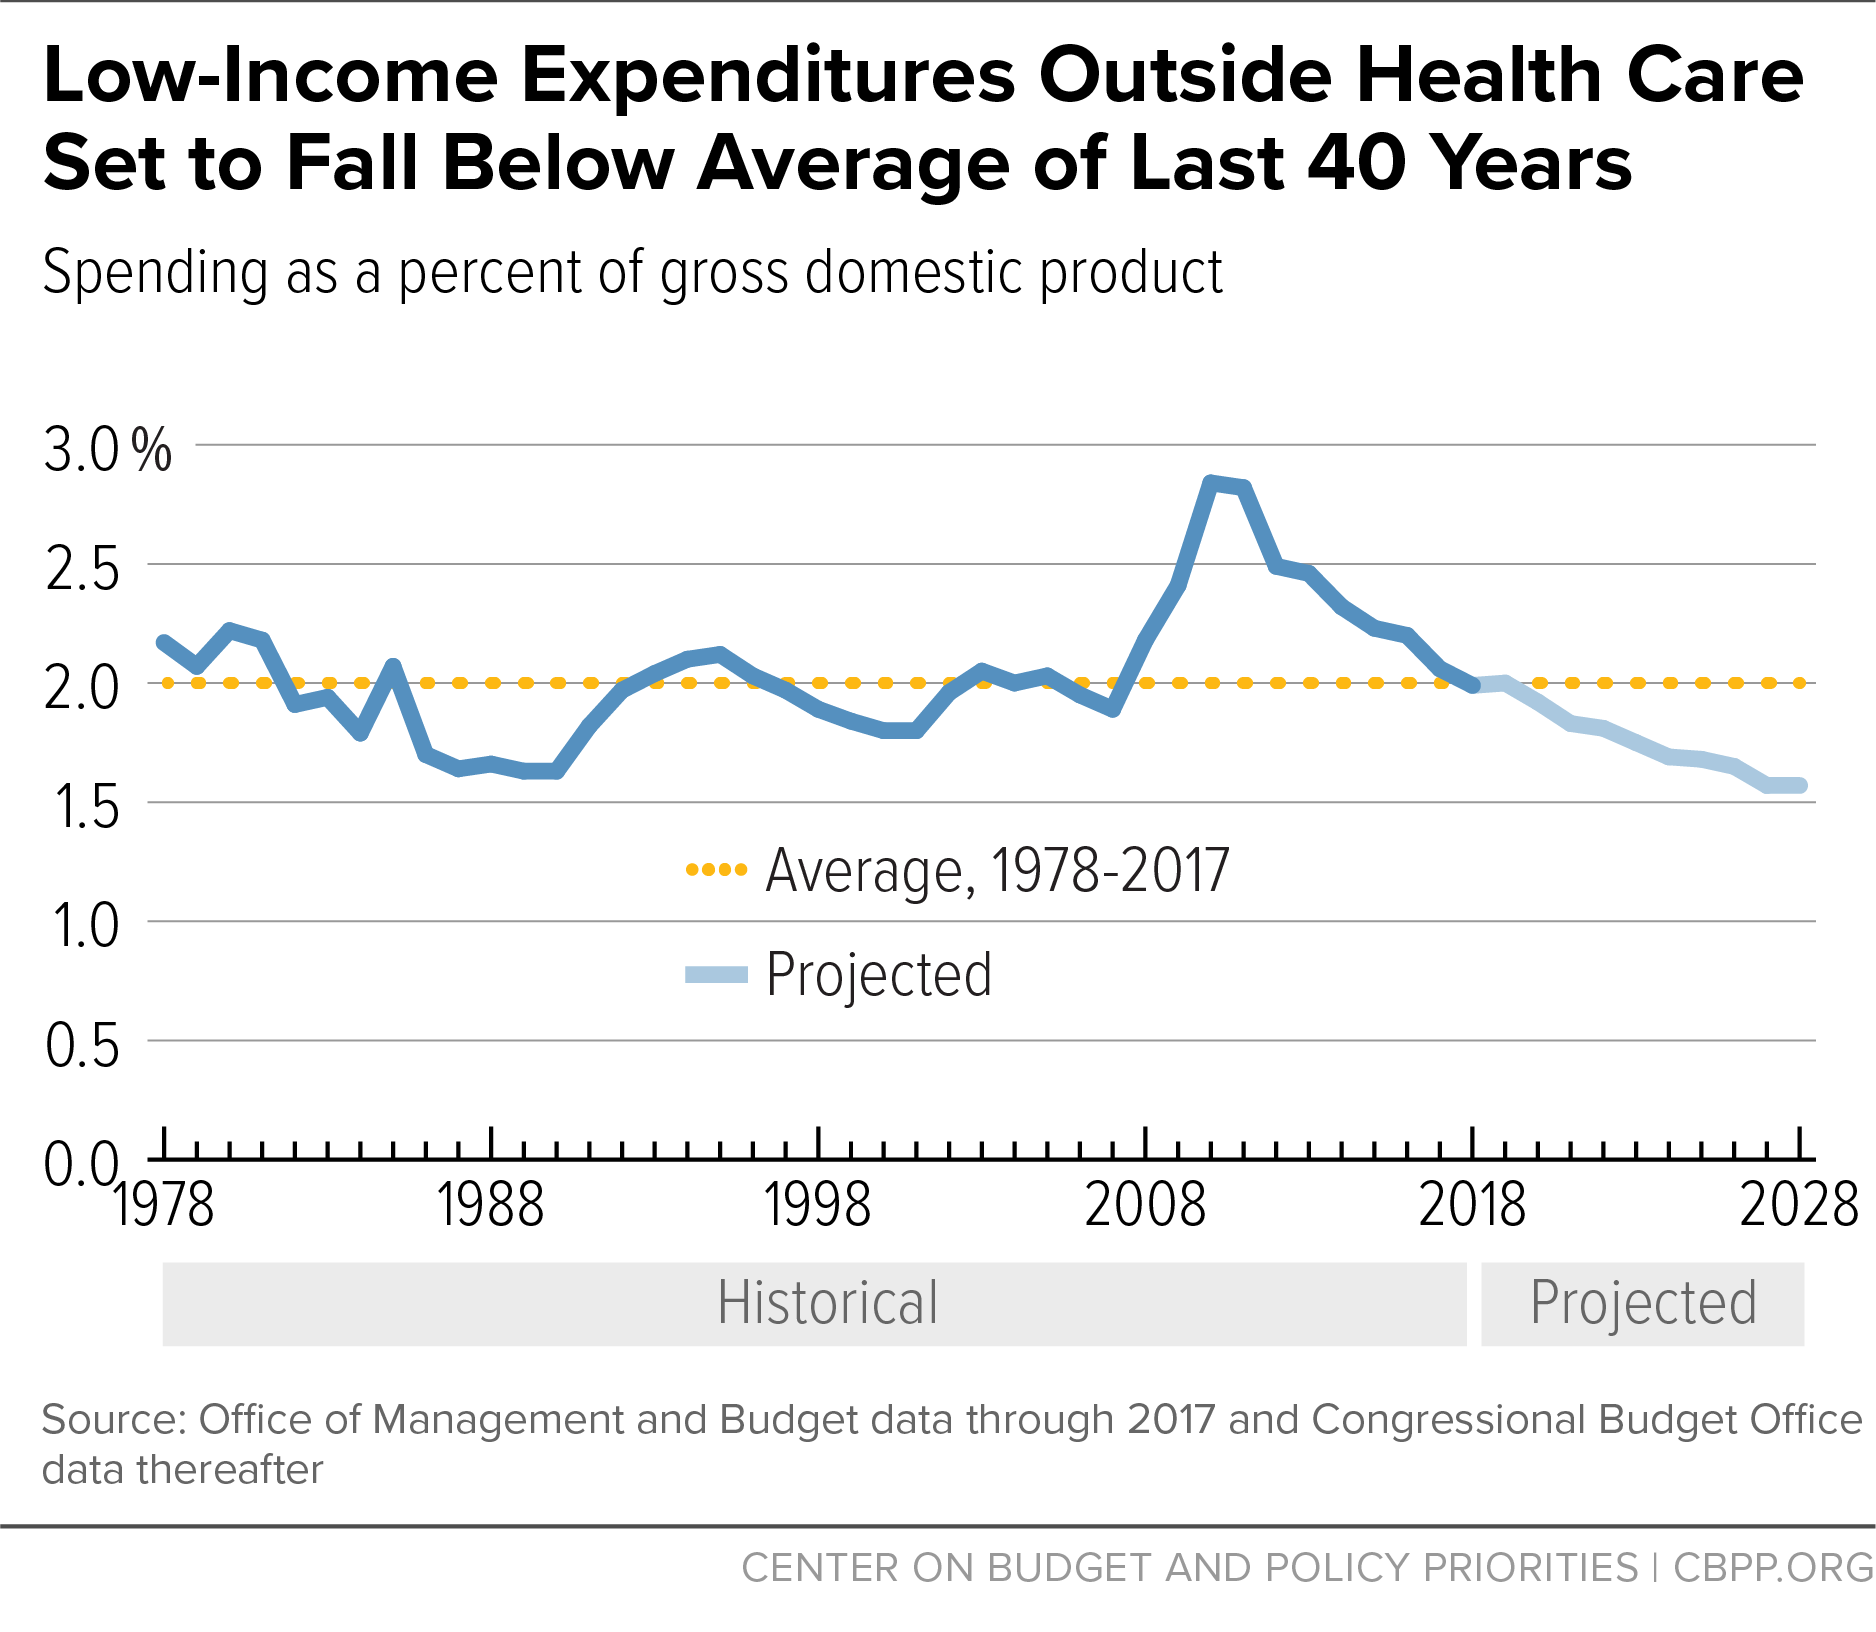 Low-Income Expenditures Outside Health Care Set to Fall Below Average of Last 40 Years